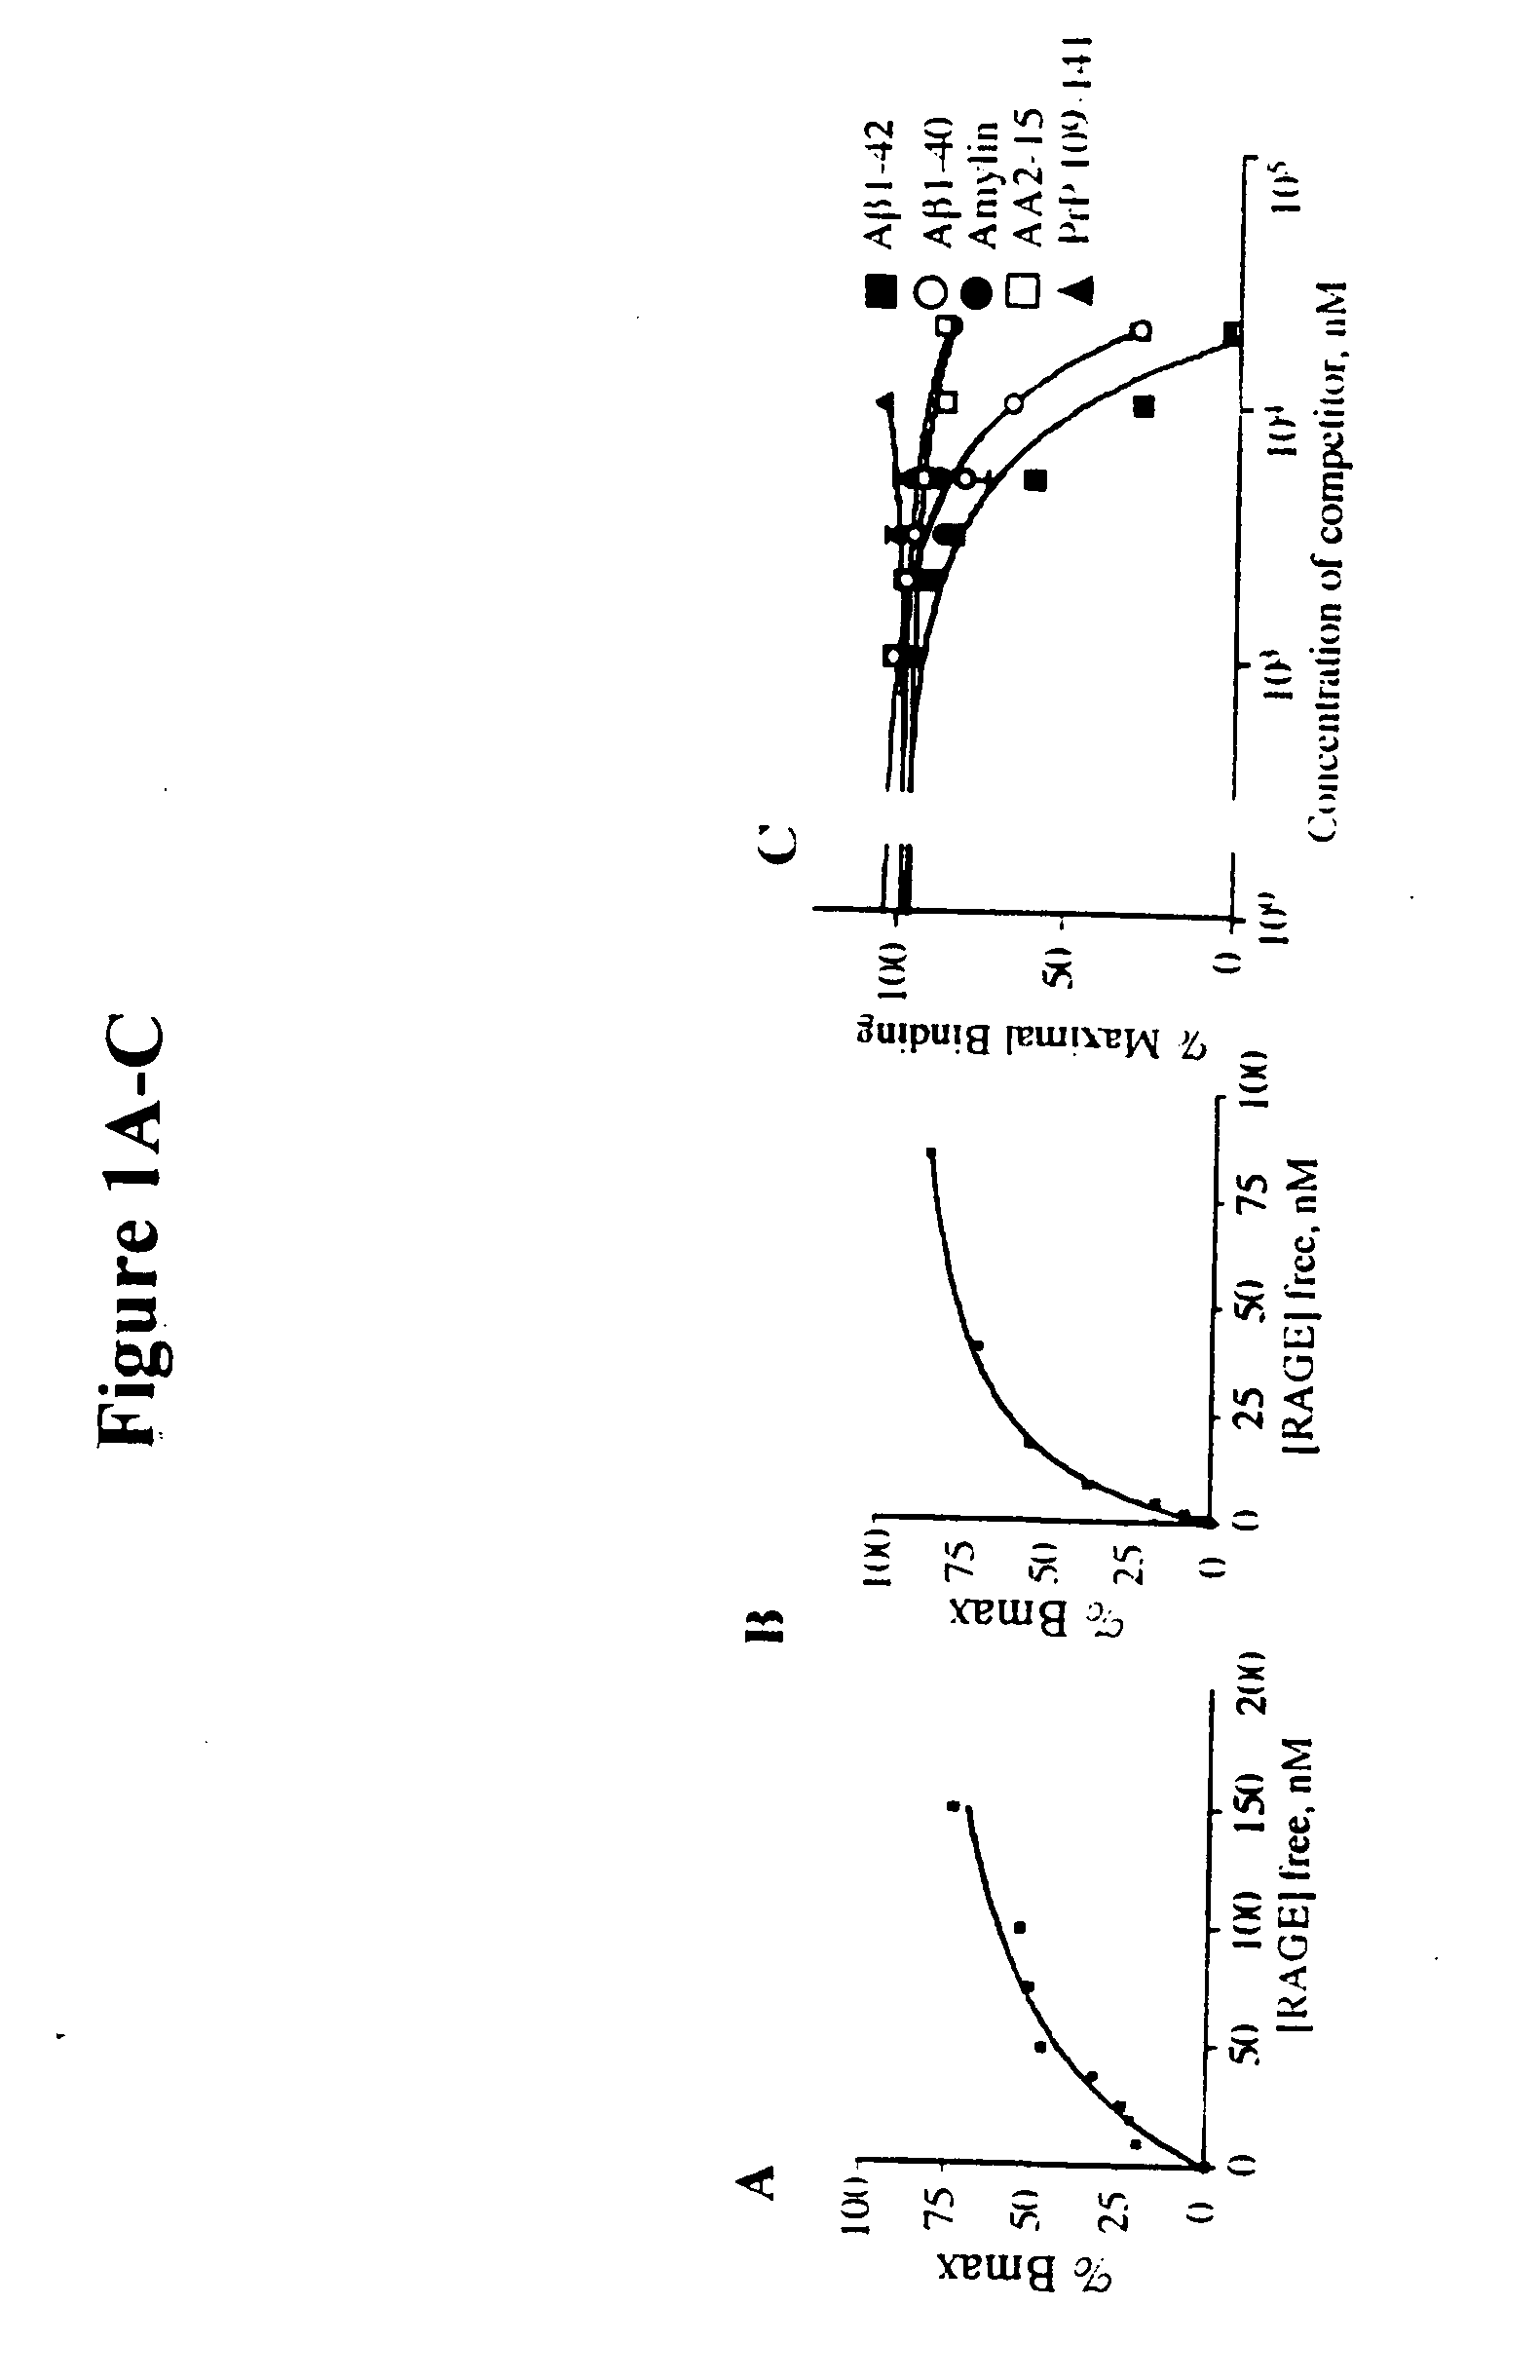 Methods of inhibiting binding of beta-sheet fibril to rage and consequences thereof